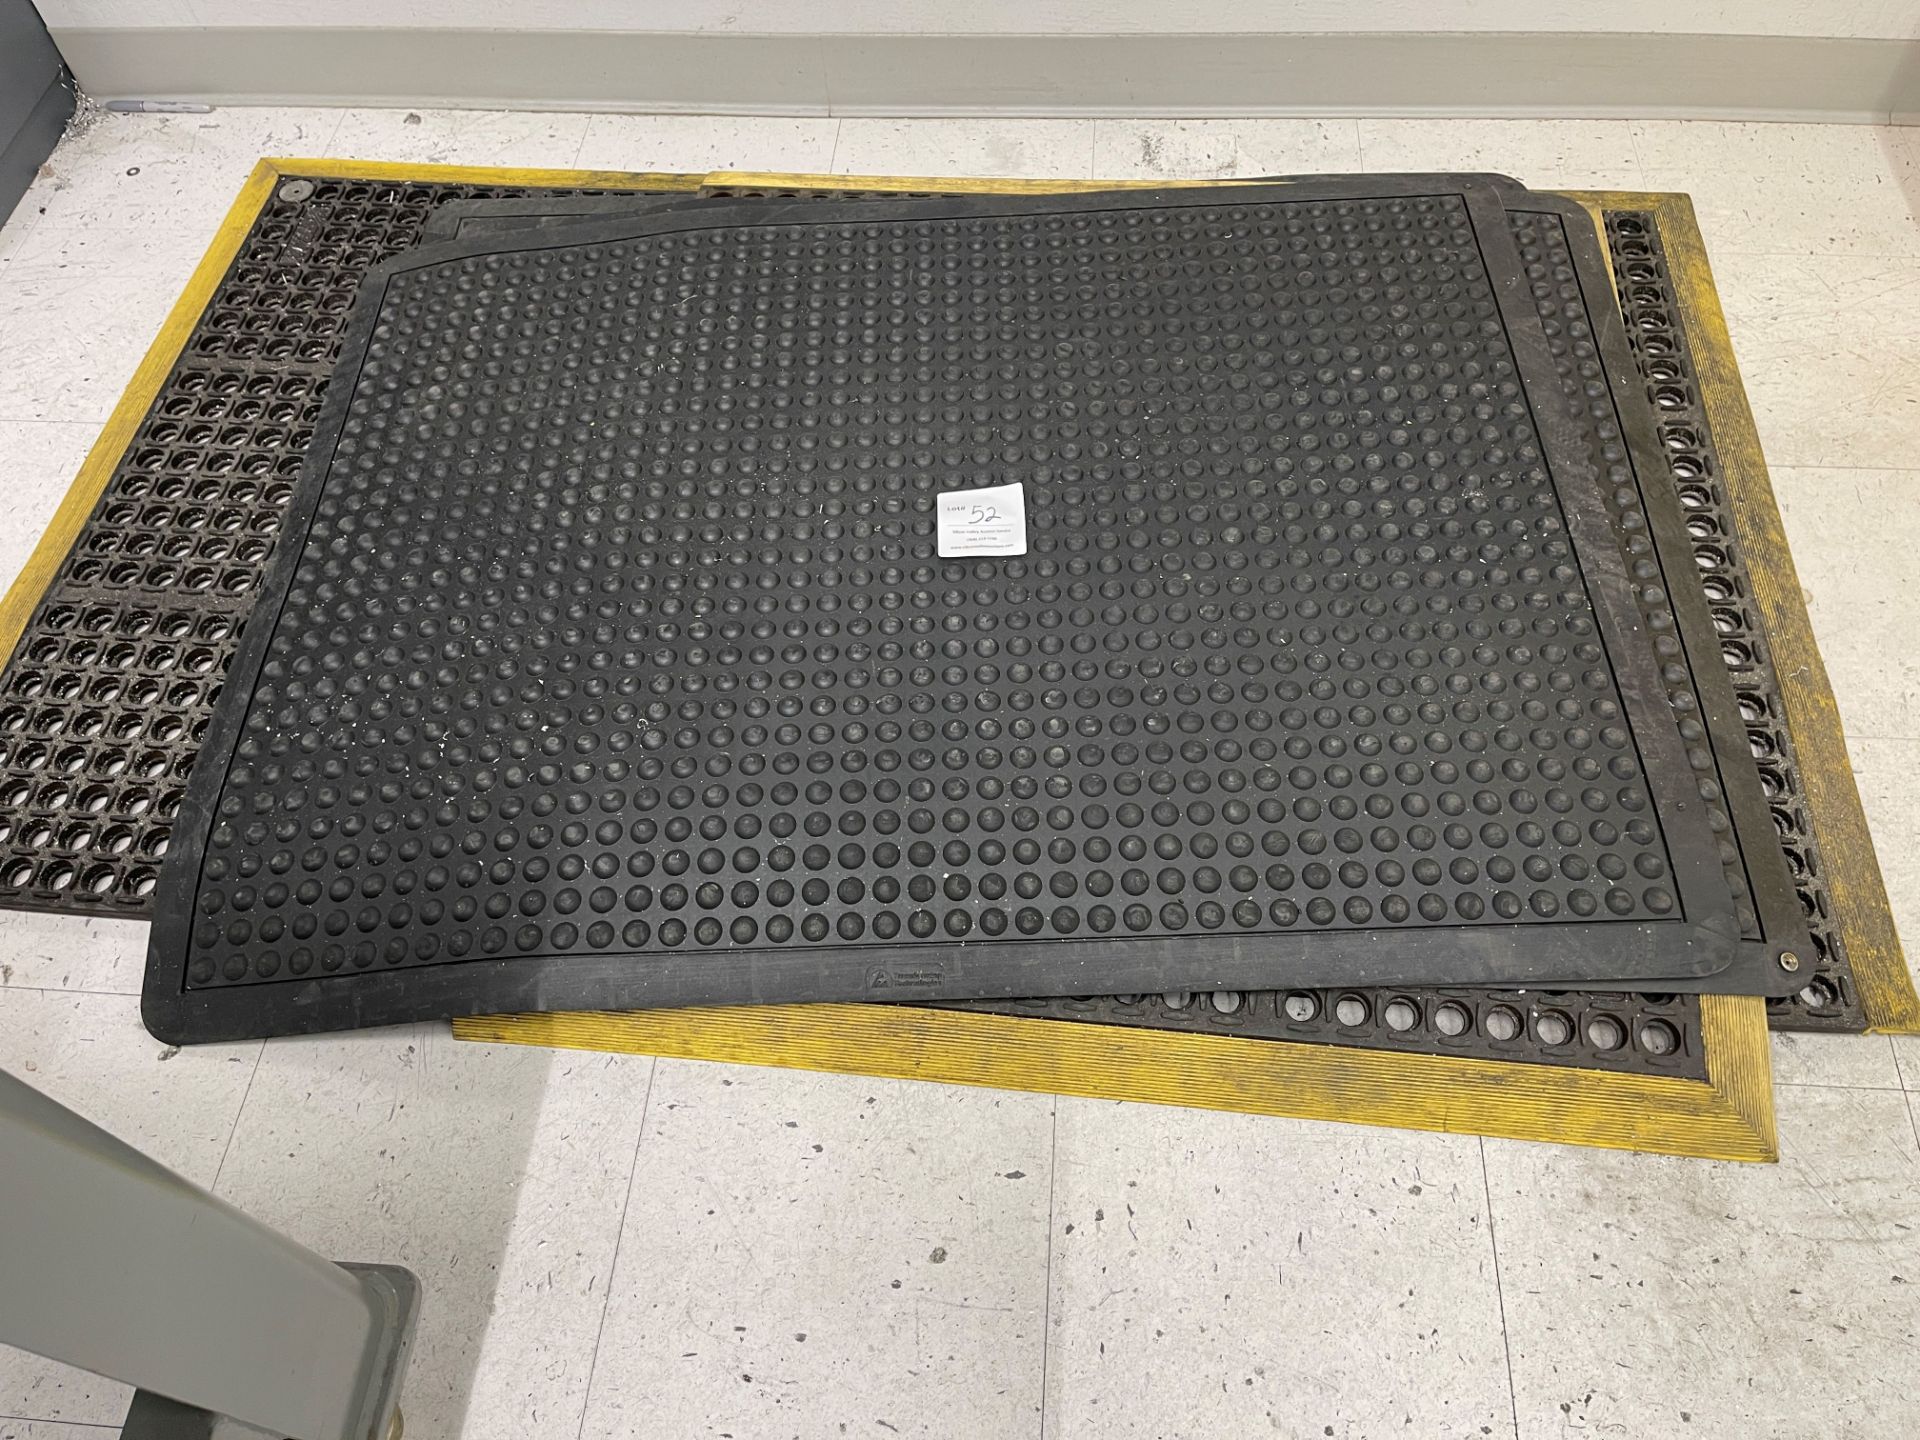 Approximately Five Rubber Floor Mats